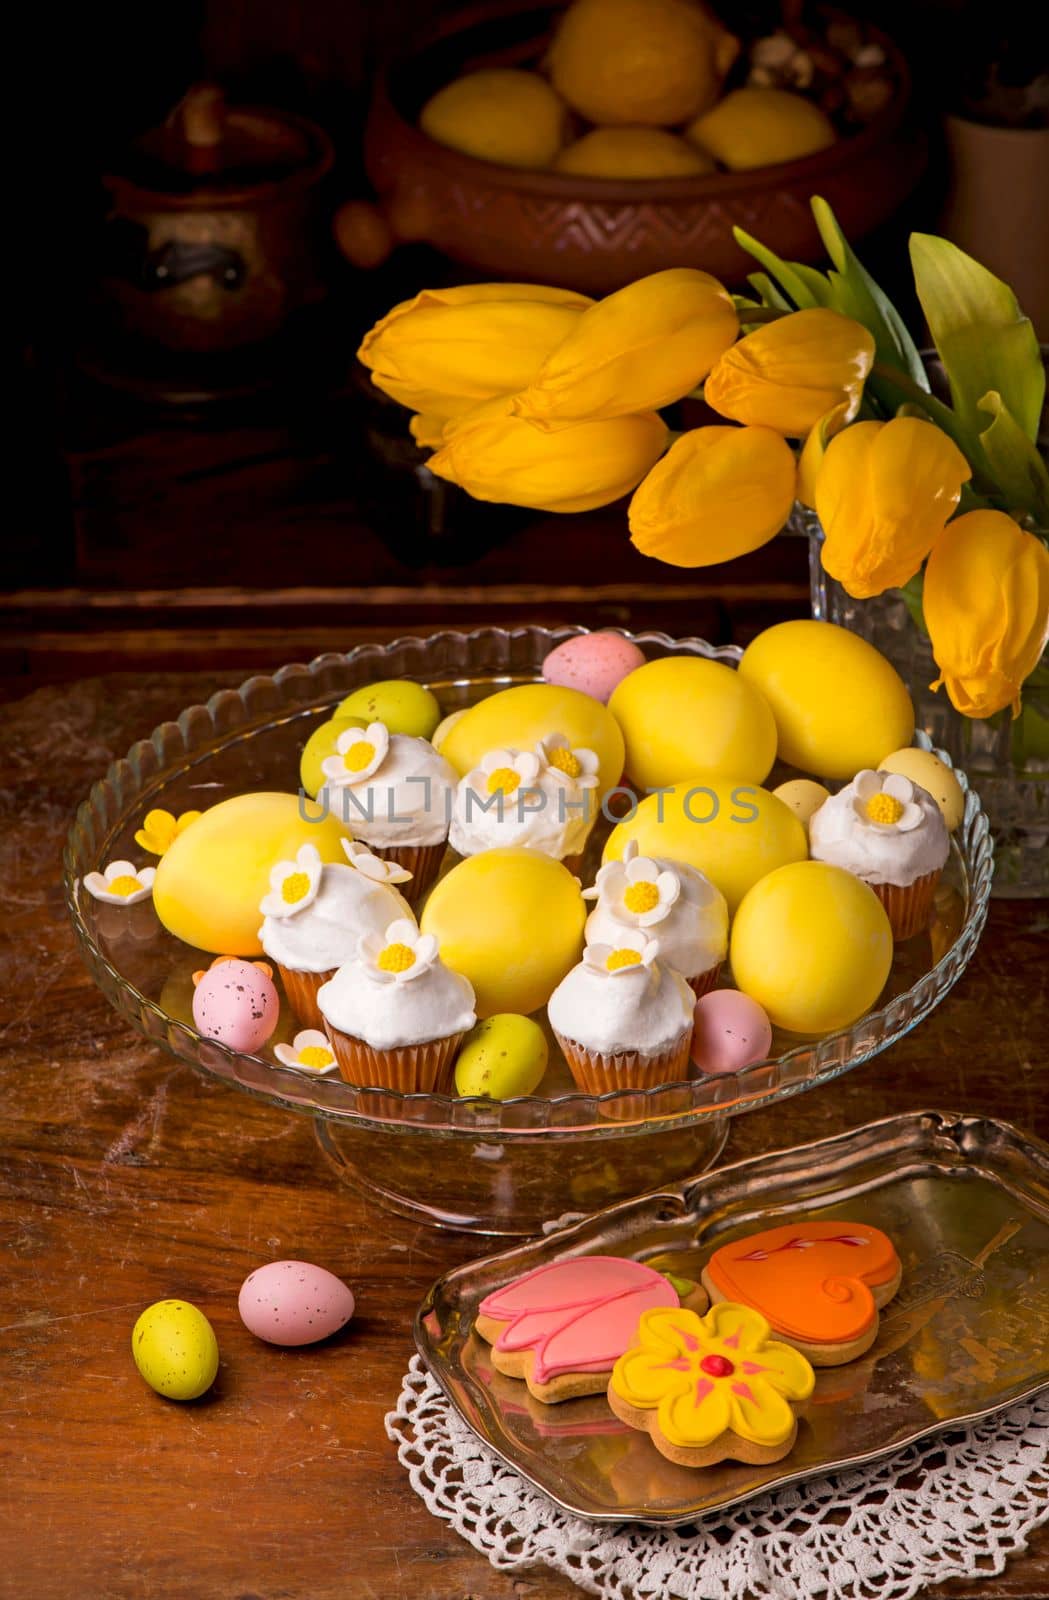 Easter eggs, flowers and muffins. Little cupcake with sugar decorations for easter by aprilphoto